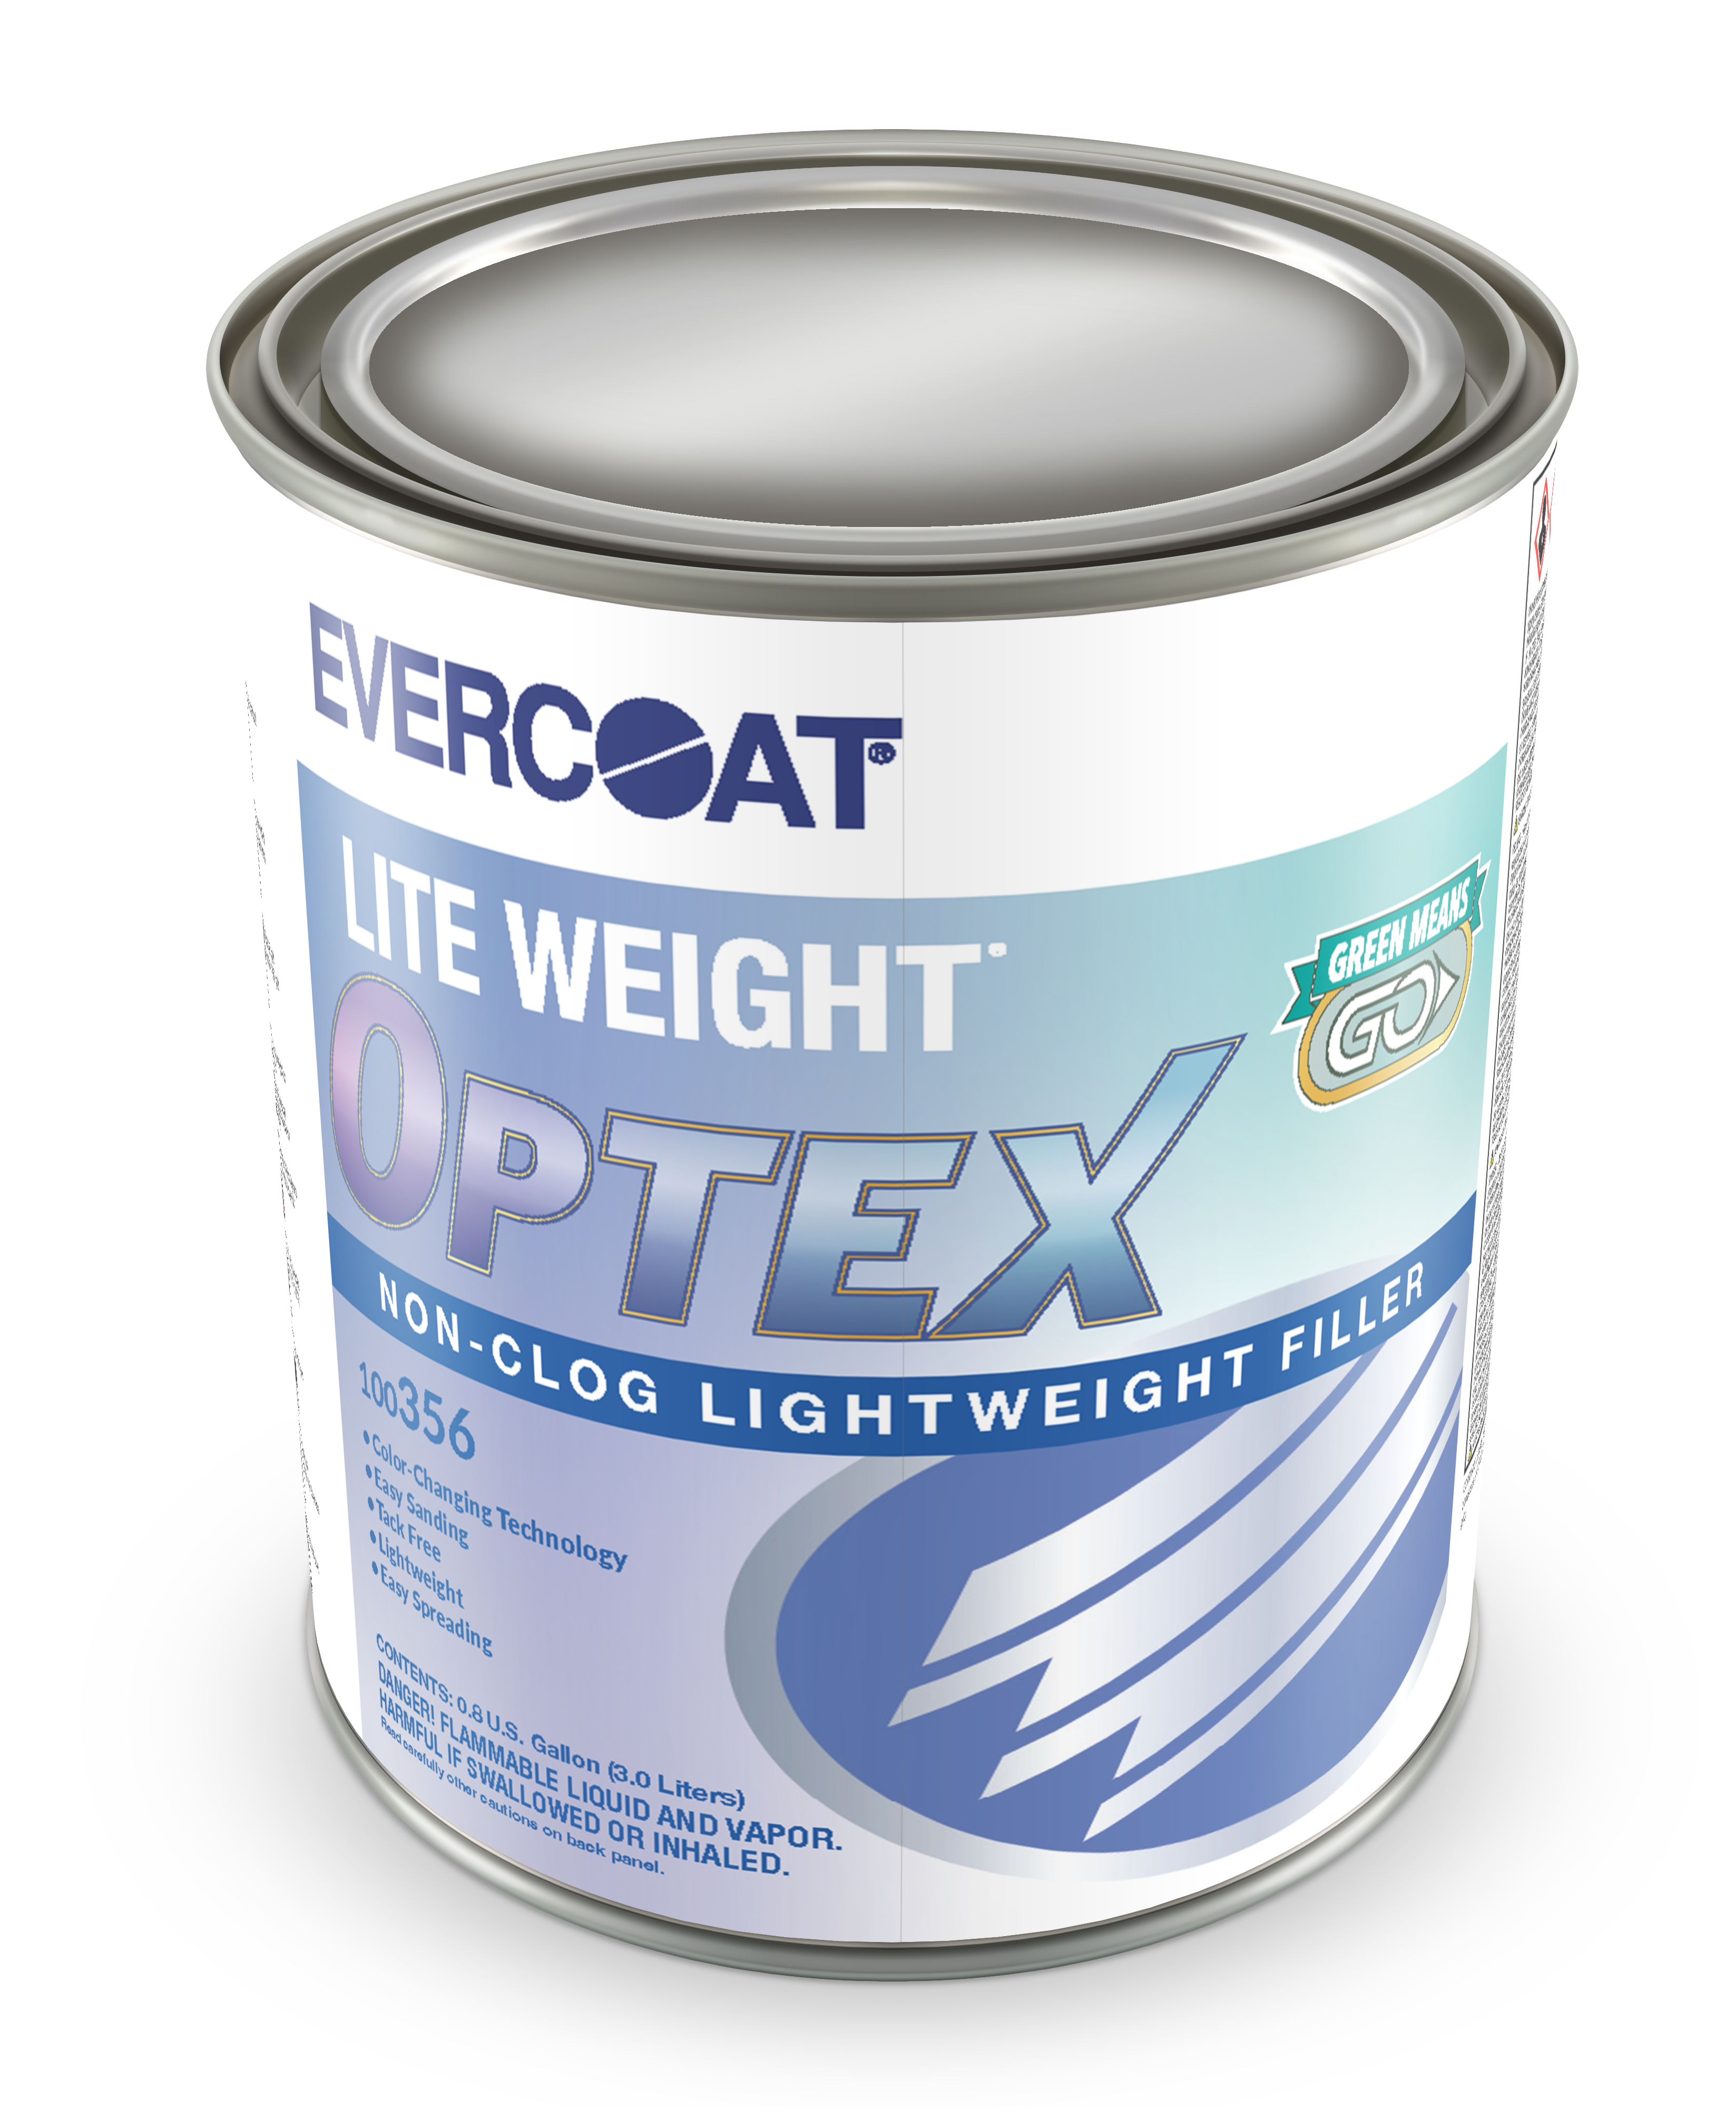 Evercoat Lite Weight Non-Clog Auto Body Filler P/N 100156- HARDENER  INCLUDED